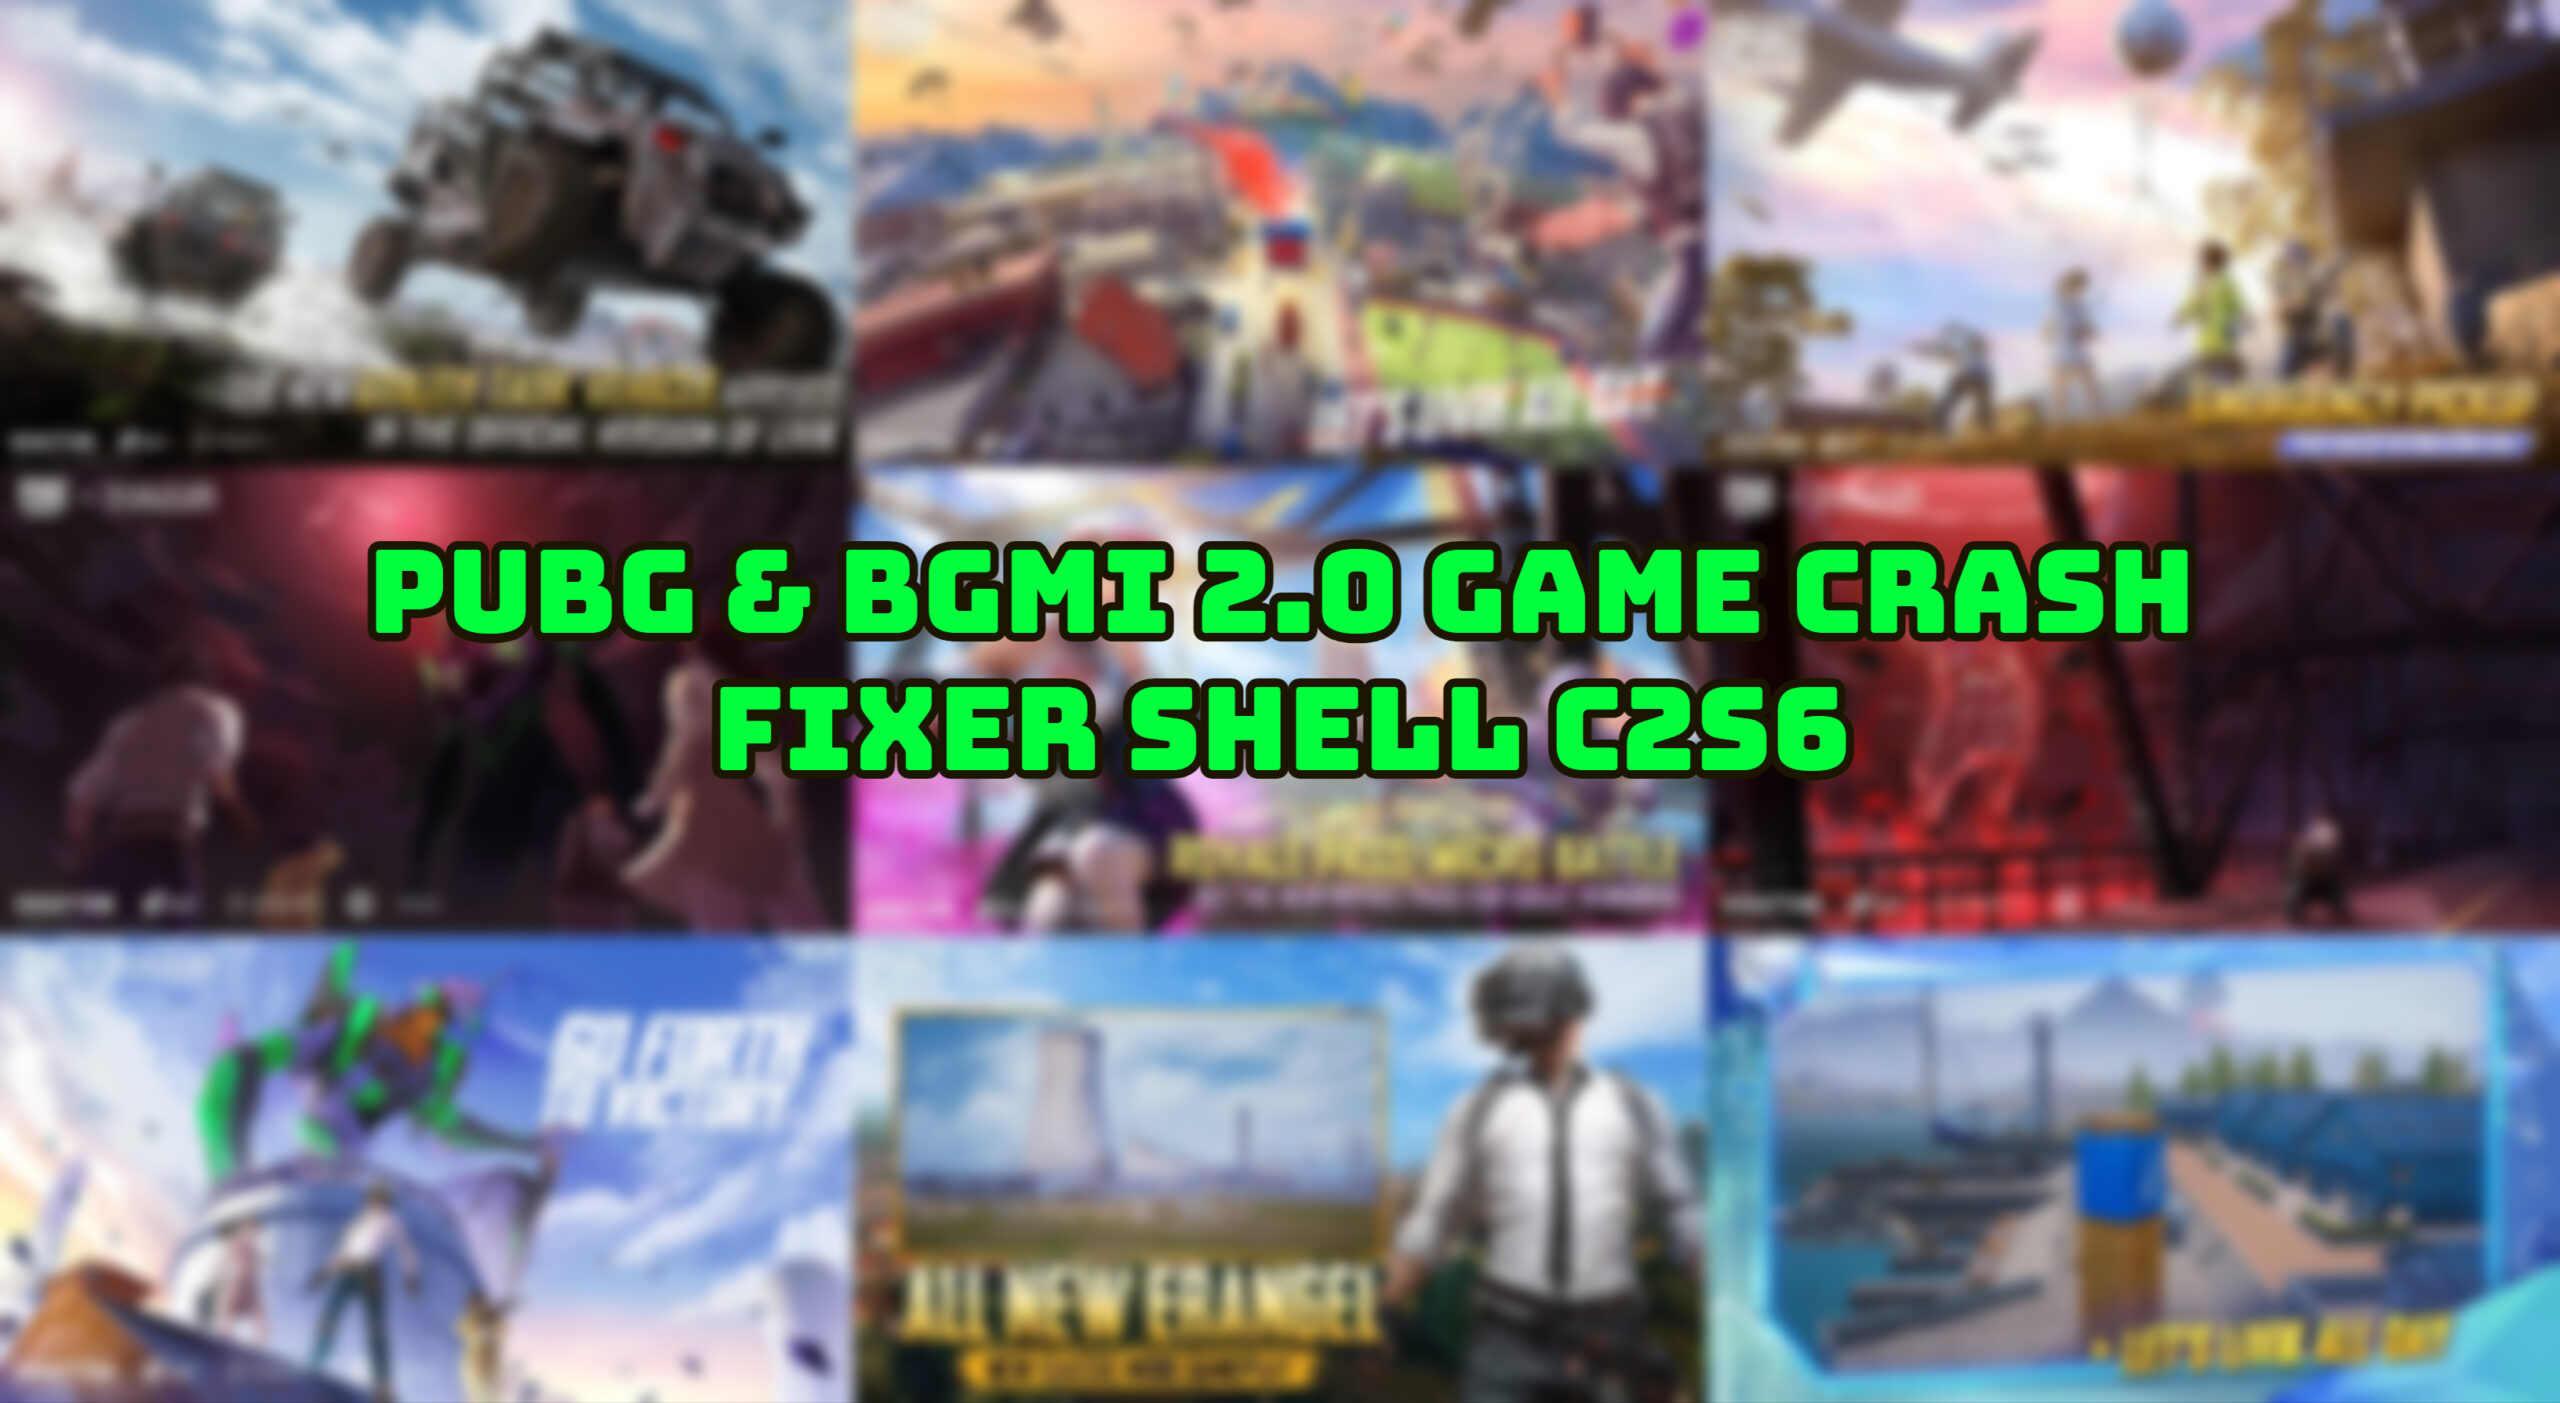 You are currently viewing PUBG & BGMI 2.0 Game Crash Fixer Shell C2S6